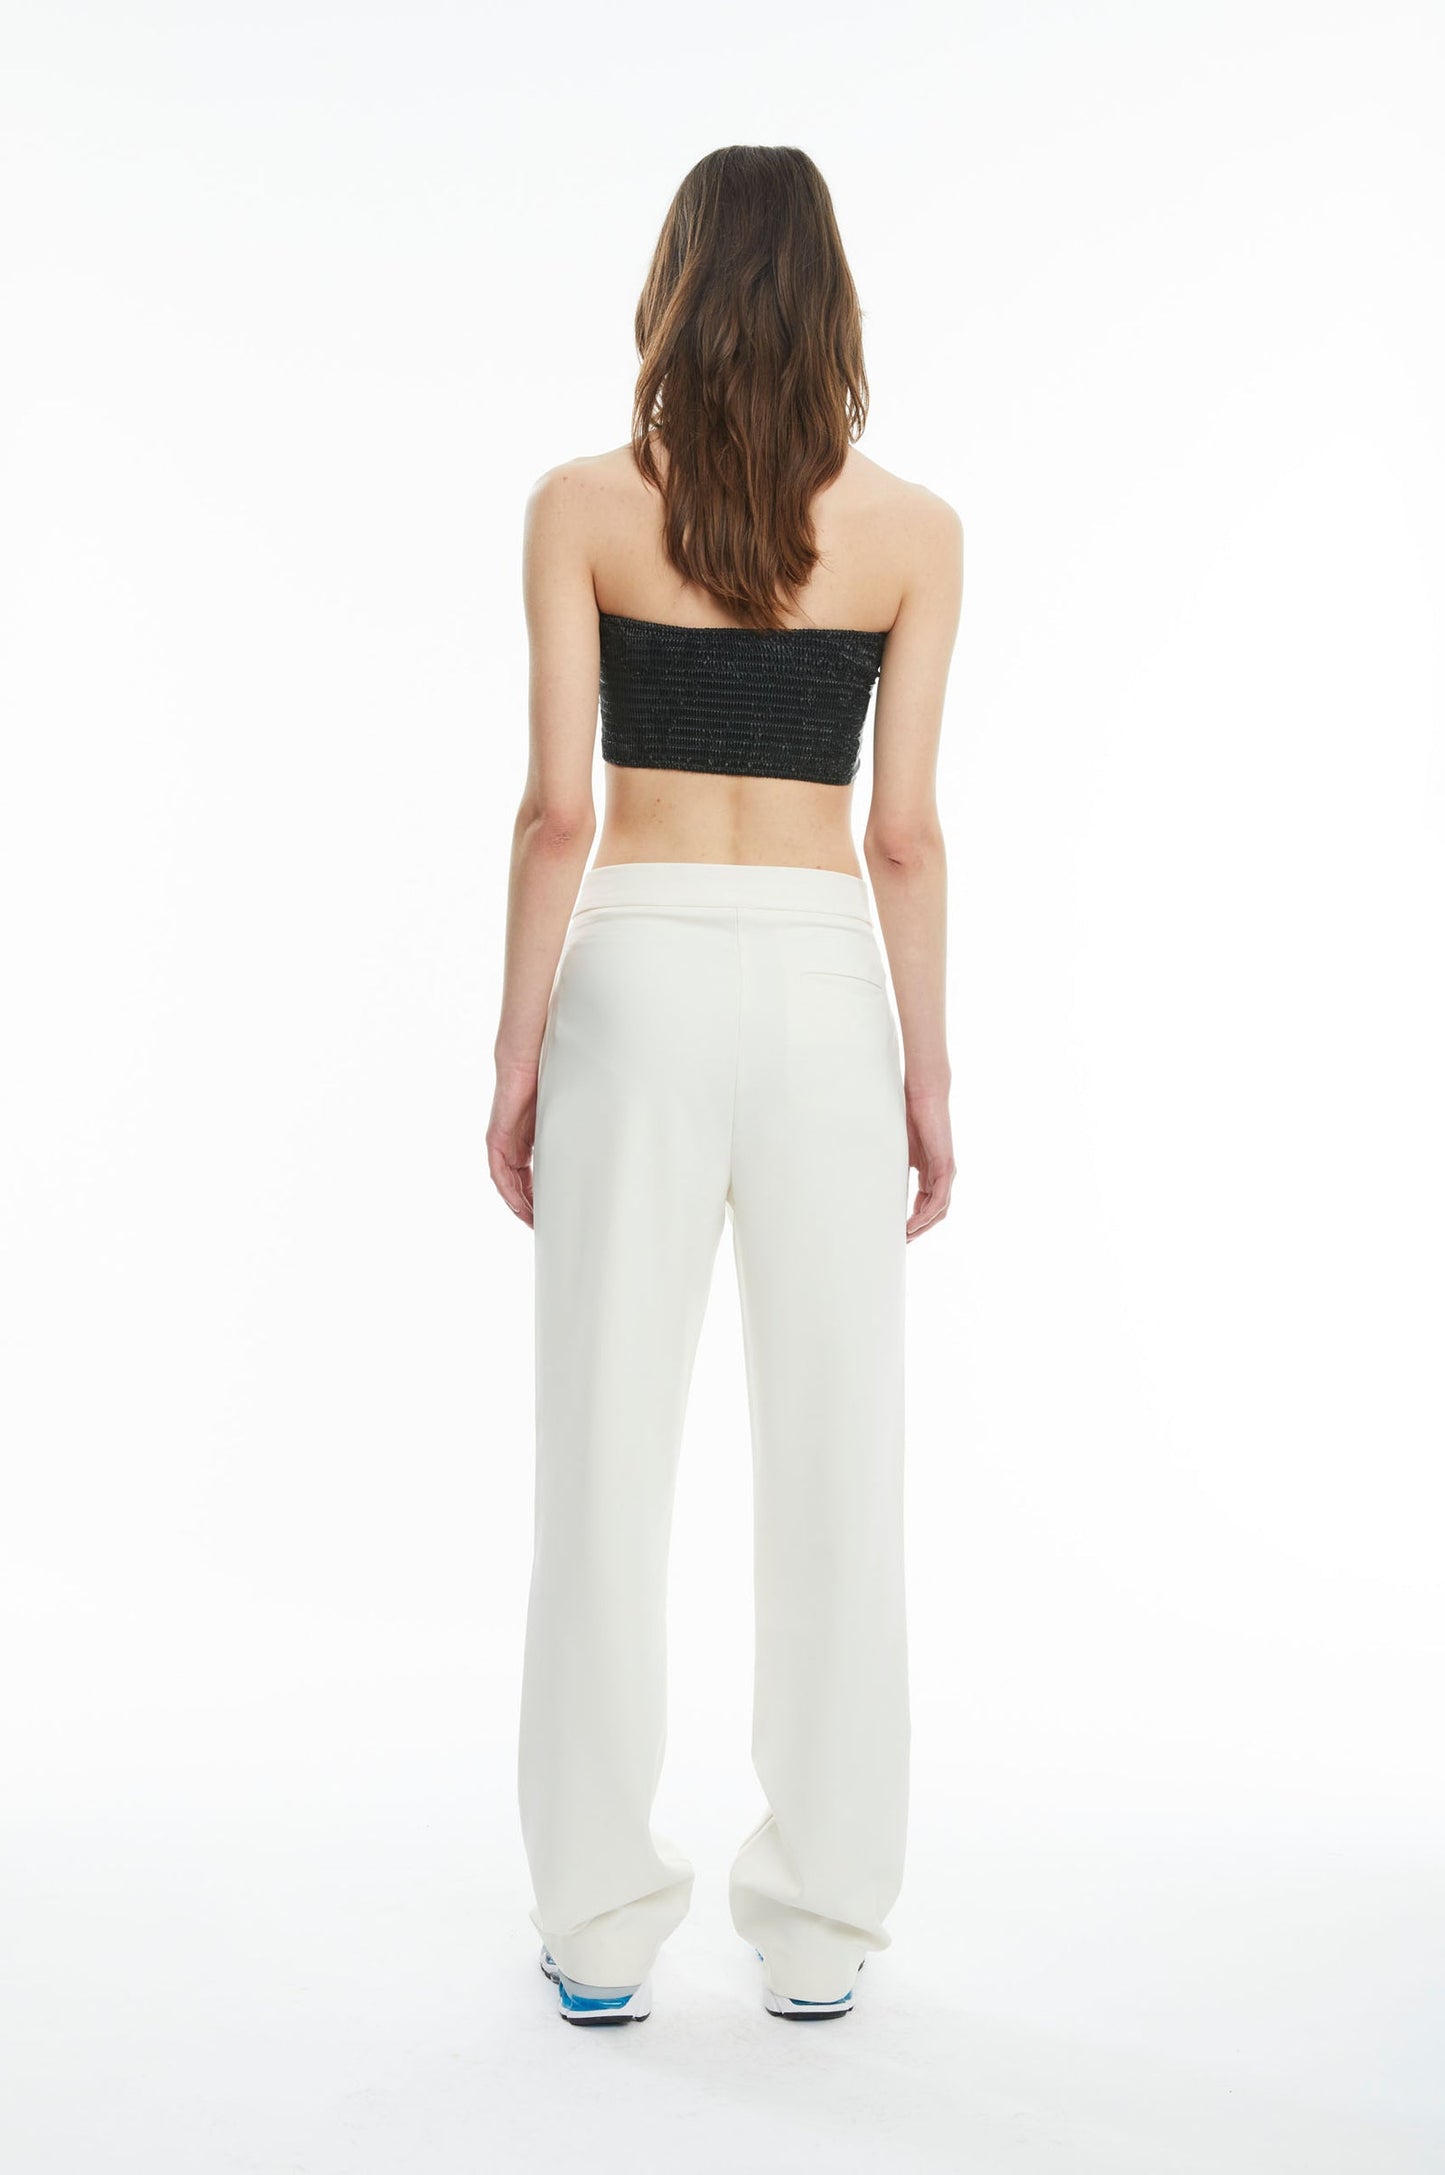 Oval Square Luxury Pants